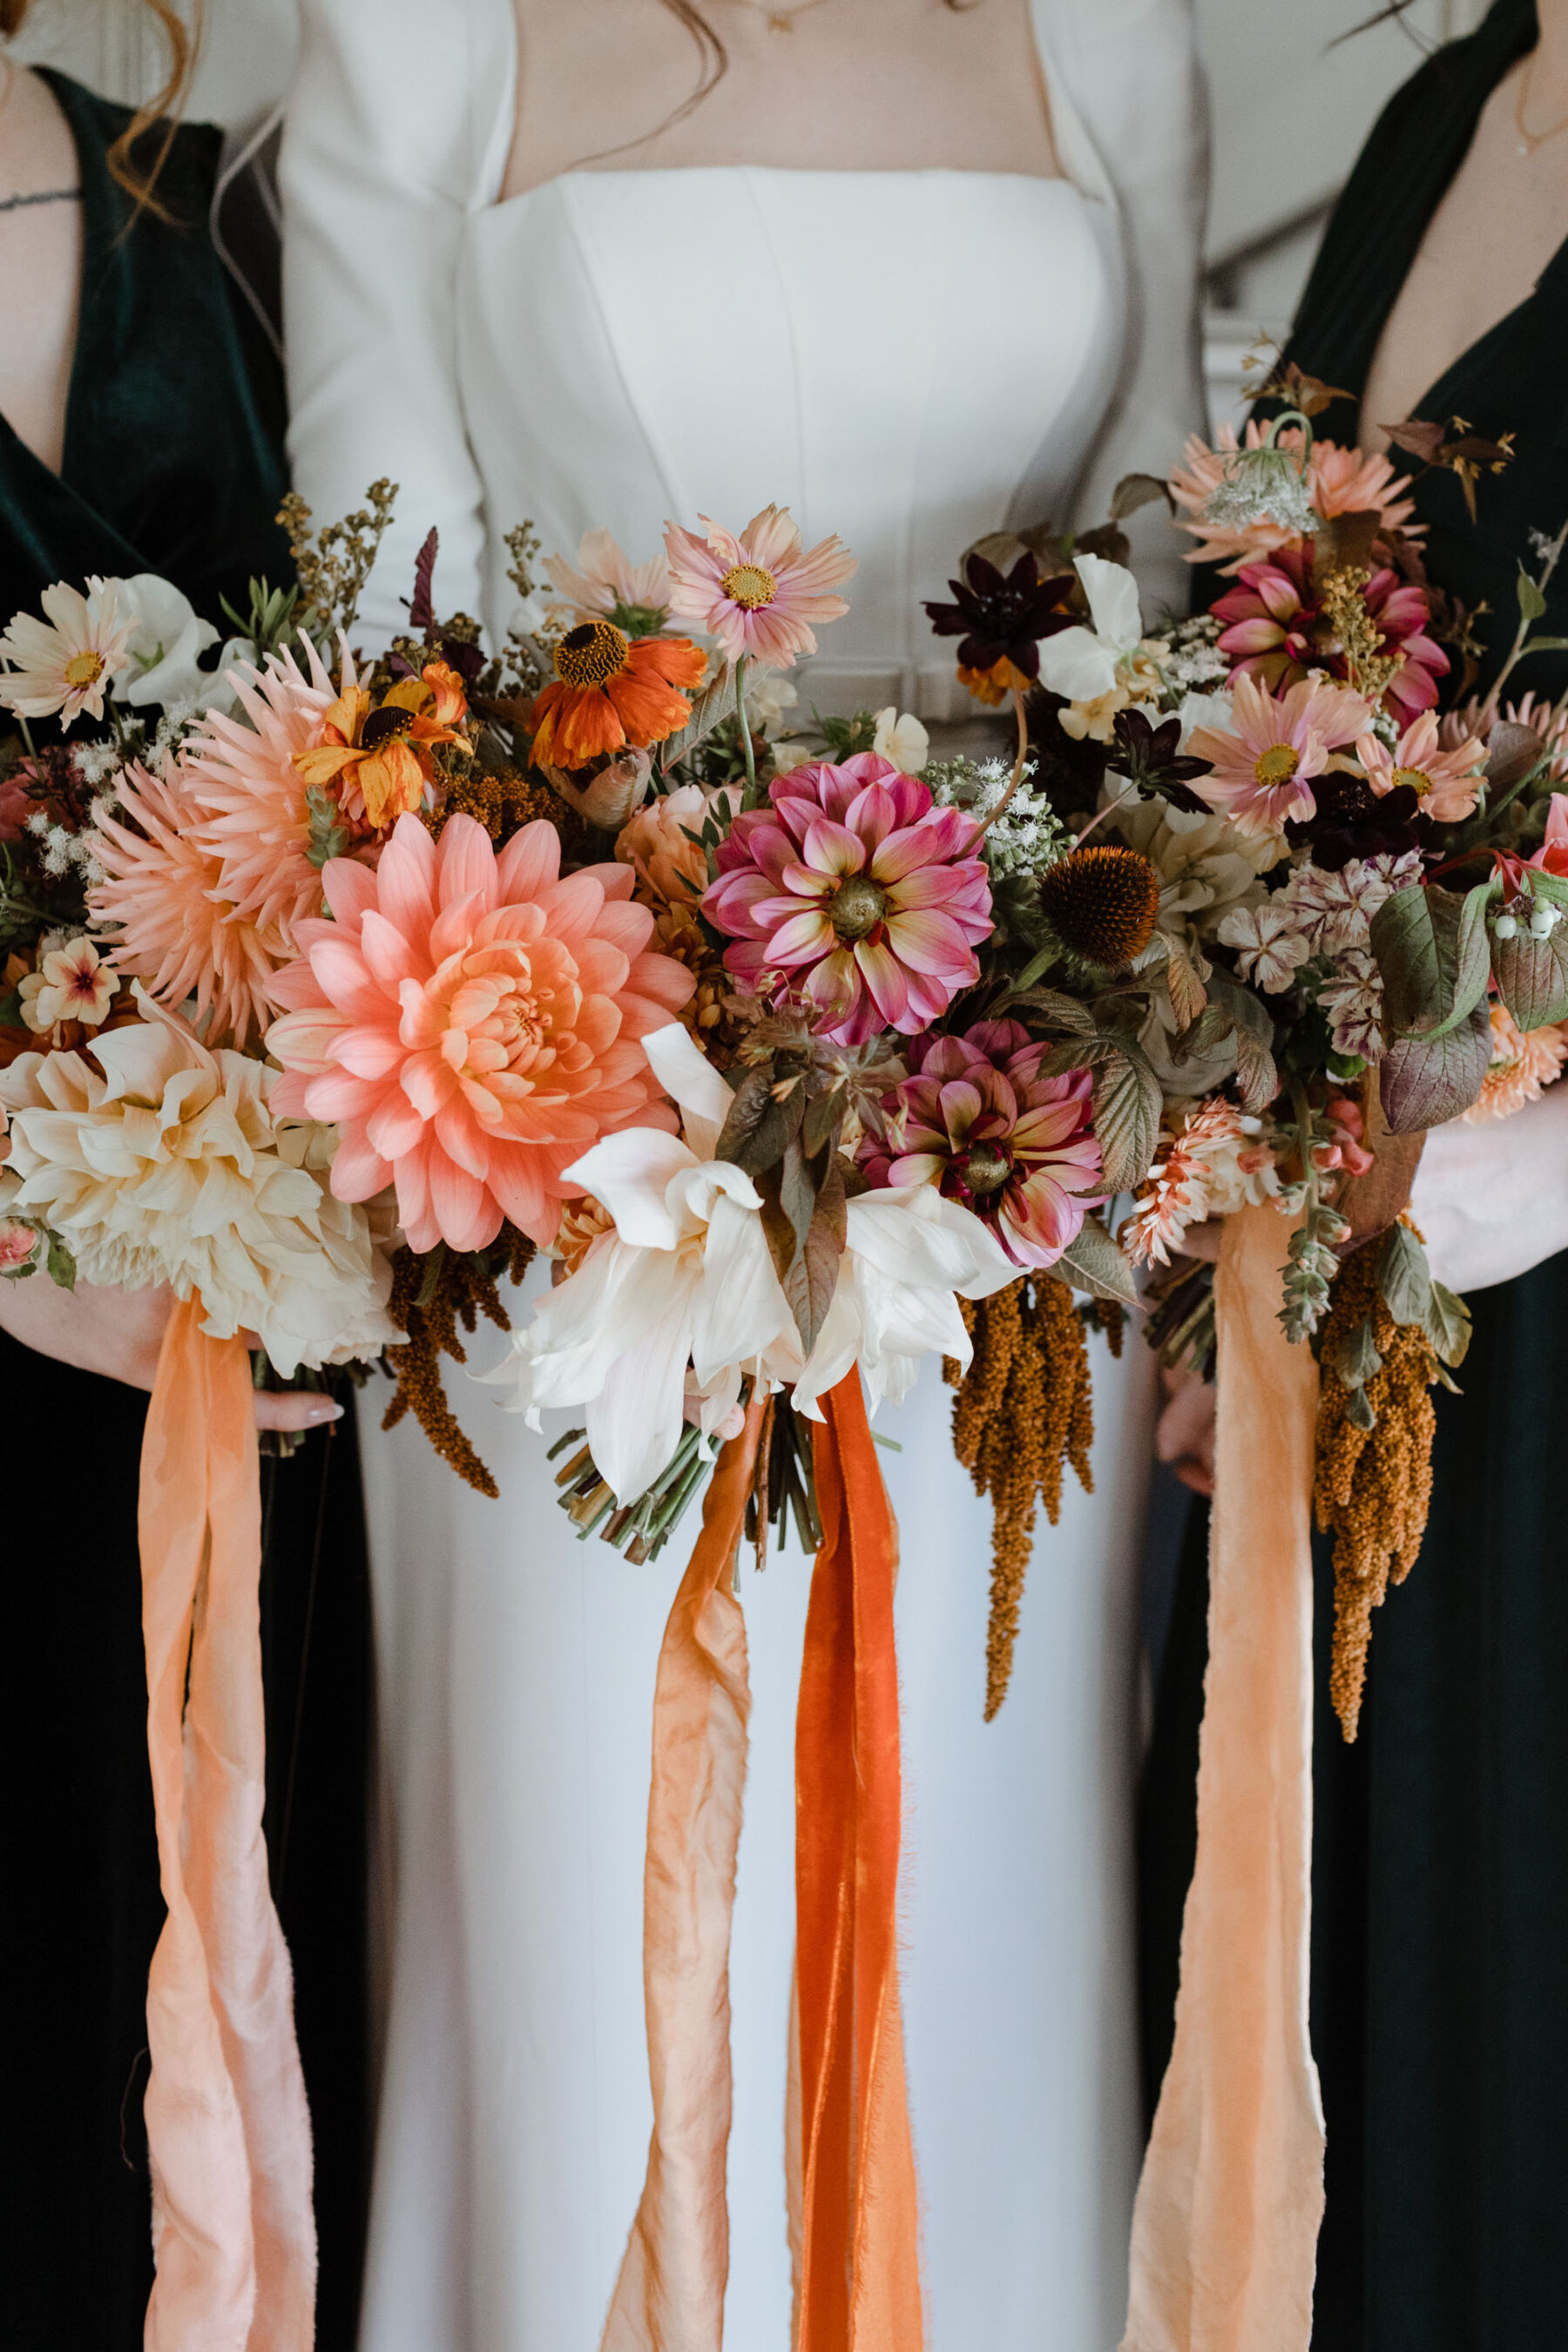 Colourful Autumn wedding bouquets with red and orange ribbons